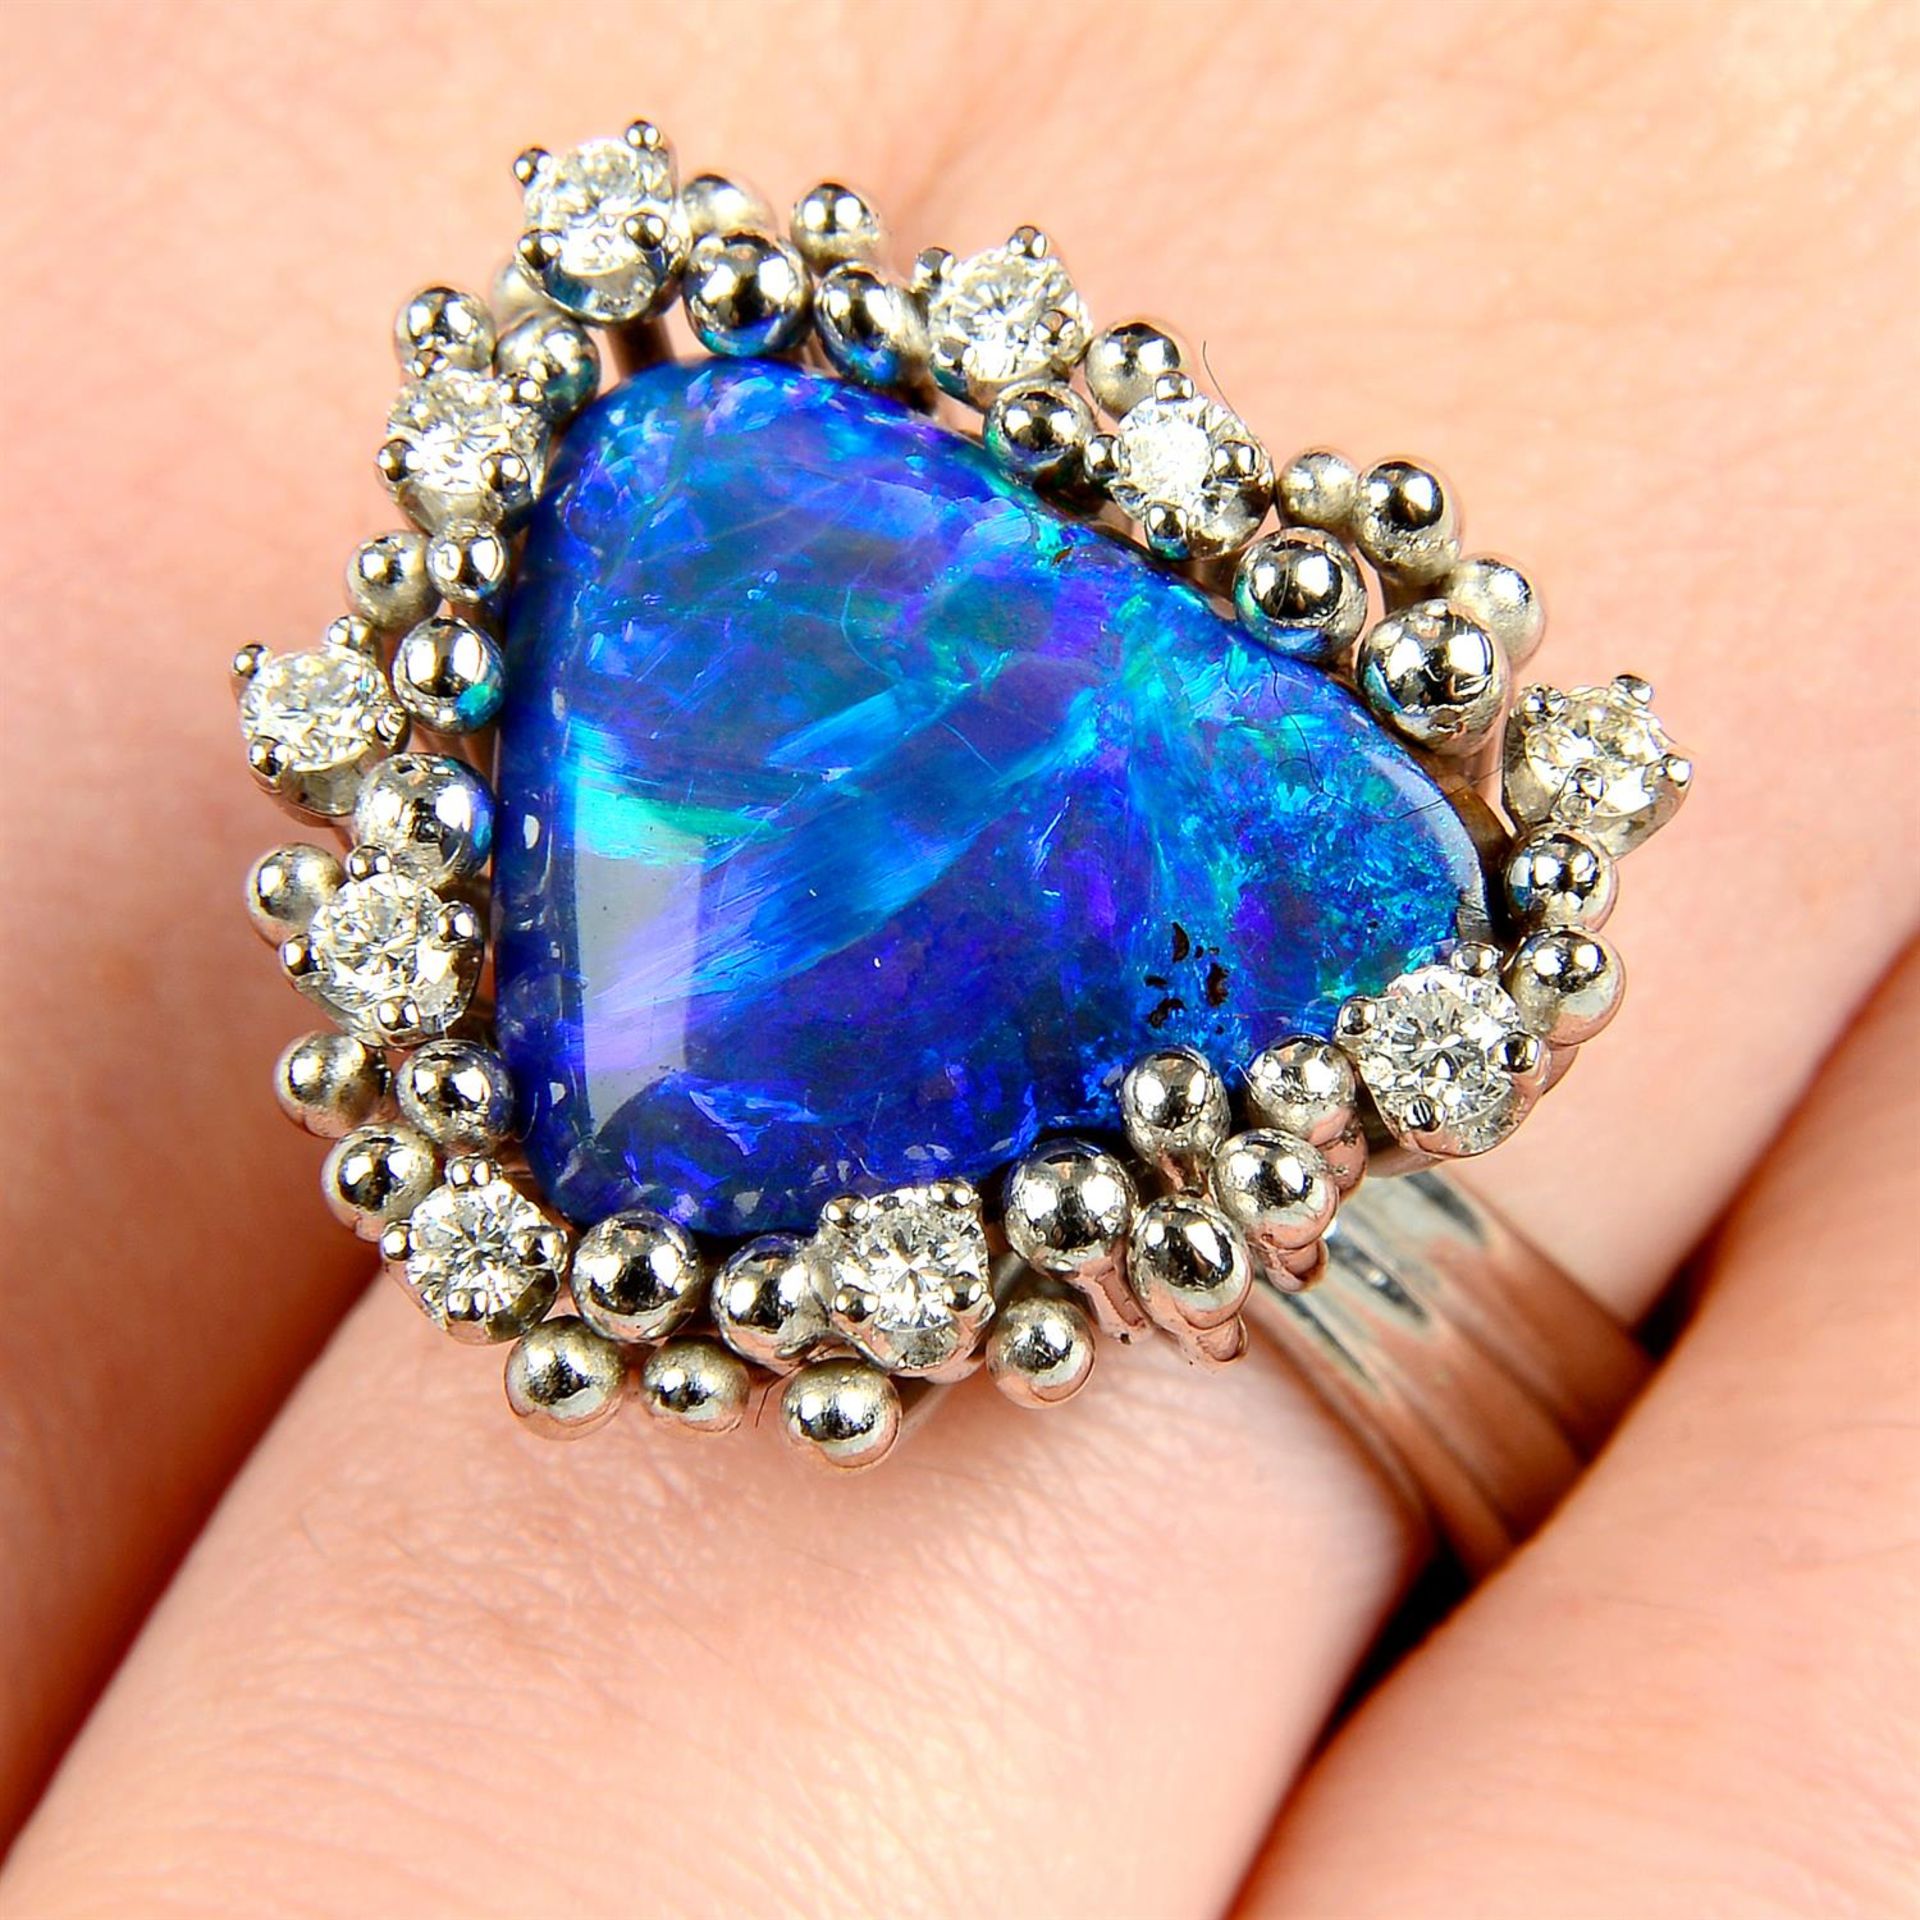 A boulder opal ring, with brilliant-cut diamond and bead surround, by Grima.